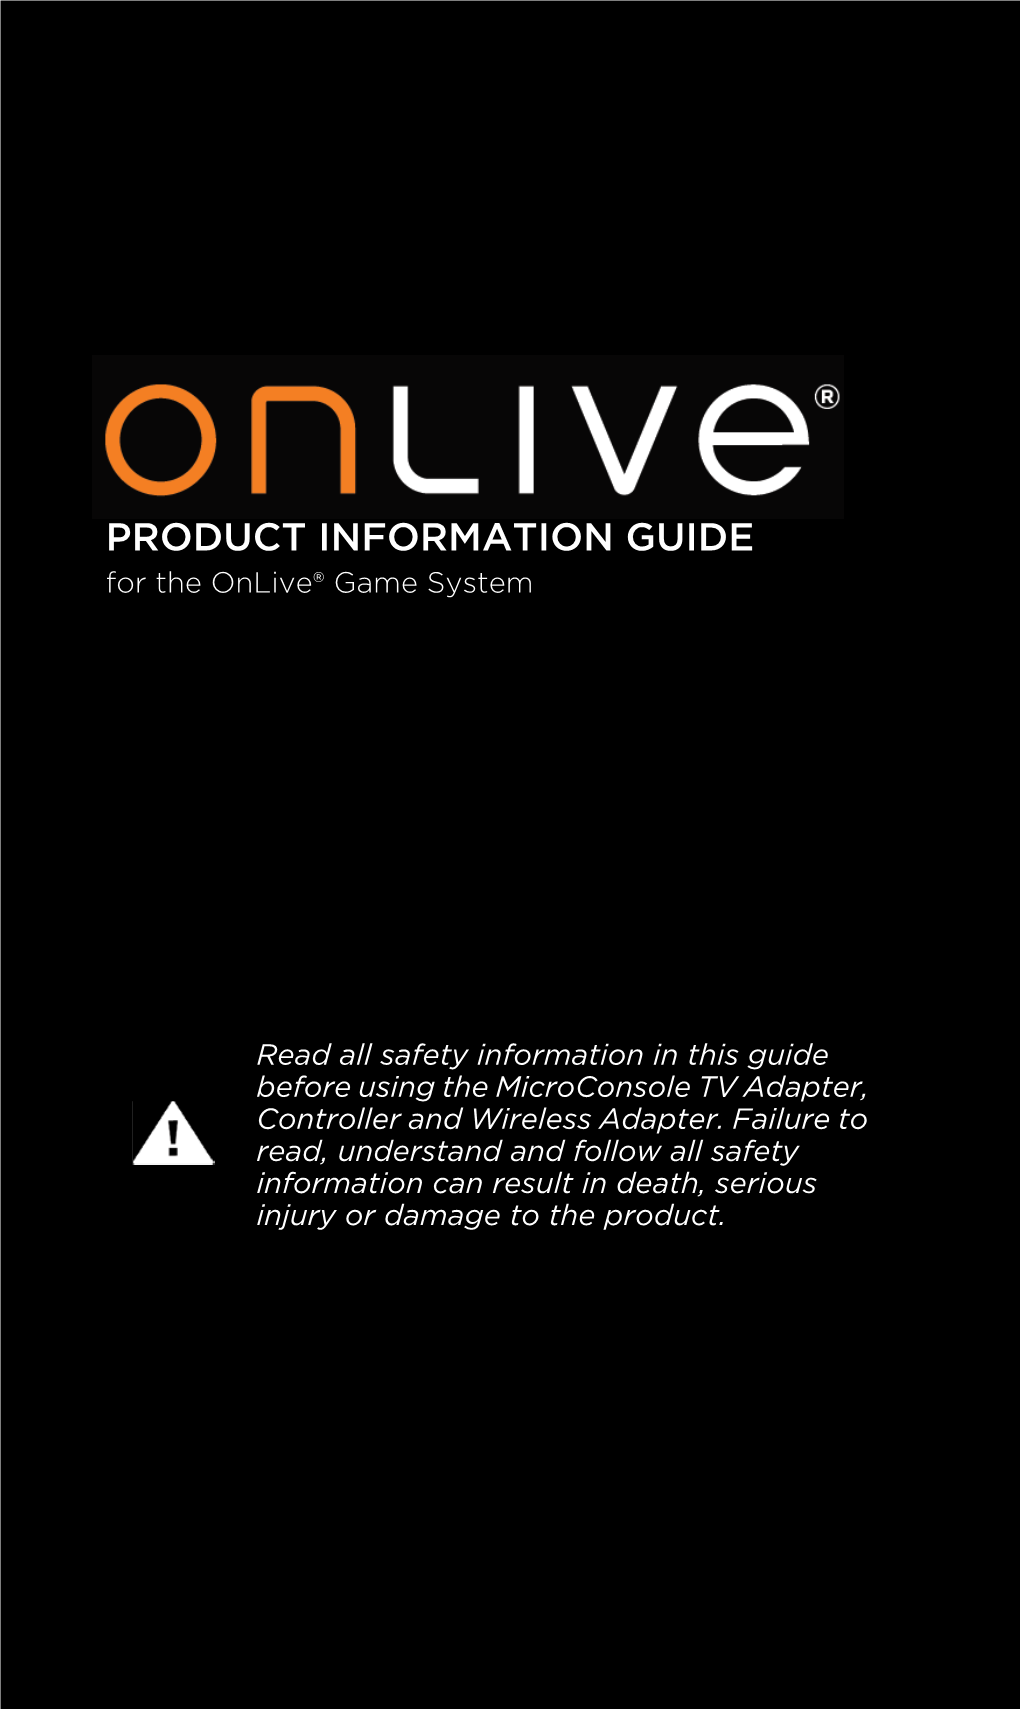 Onlive Game System Product Information Guide